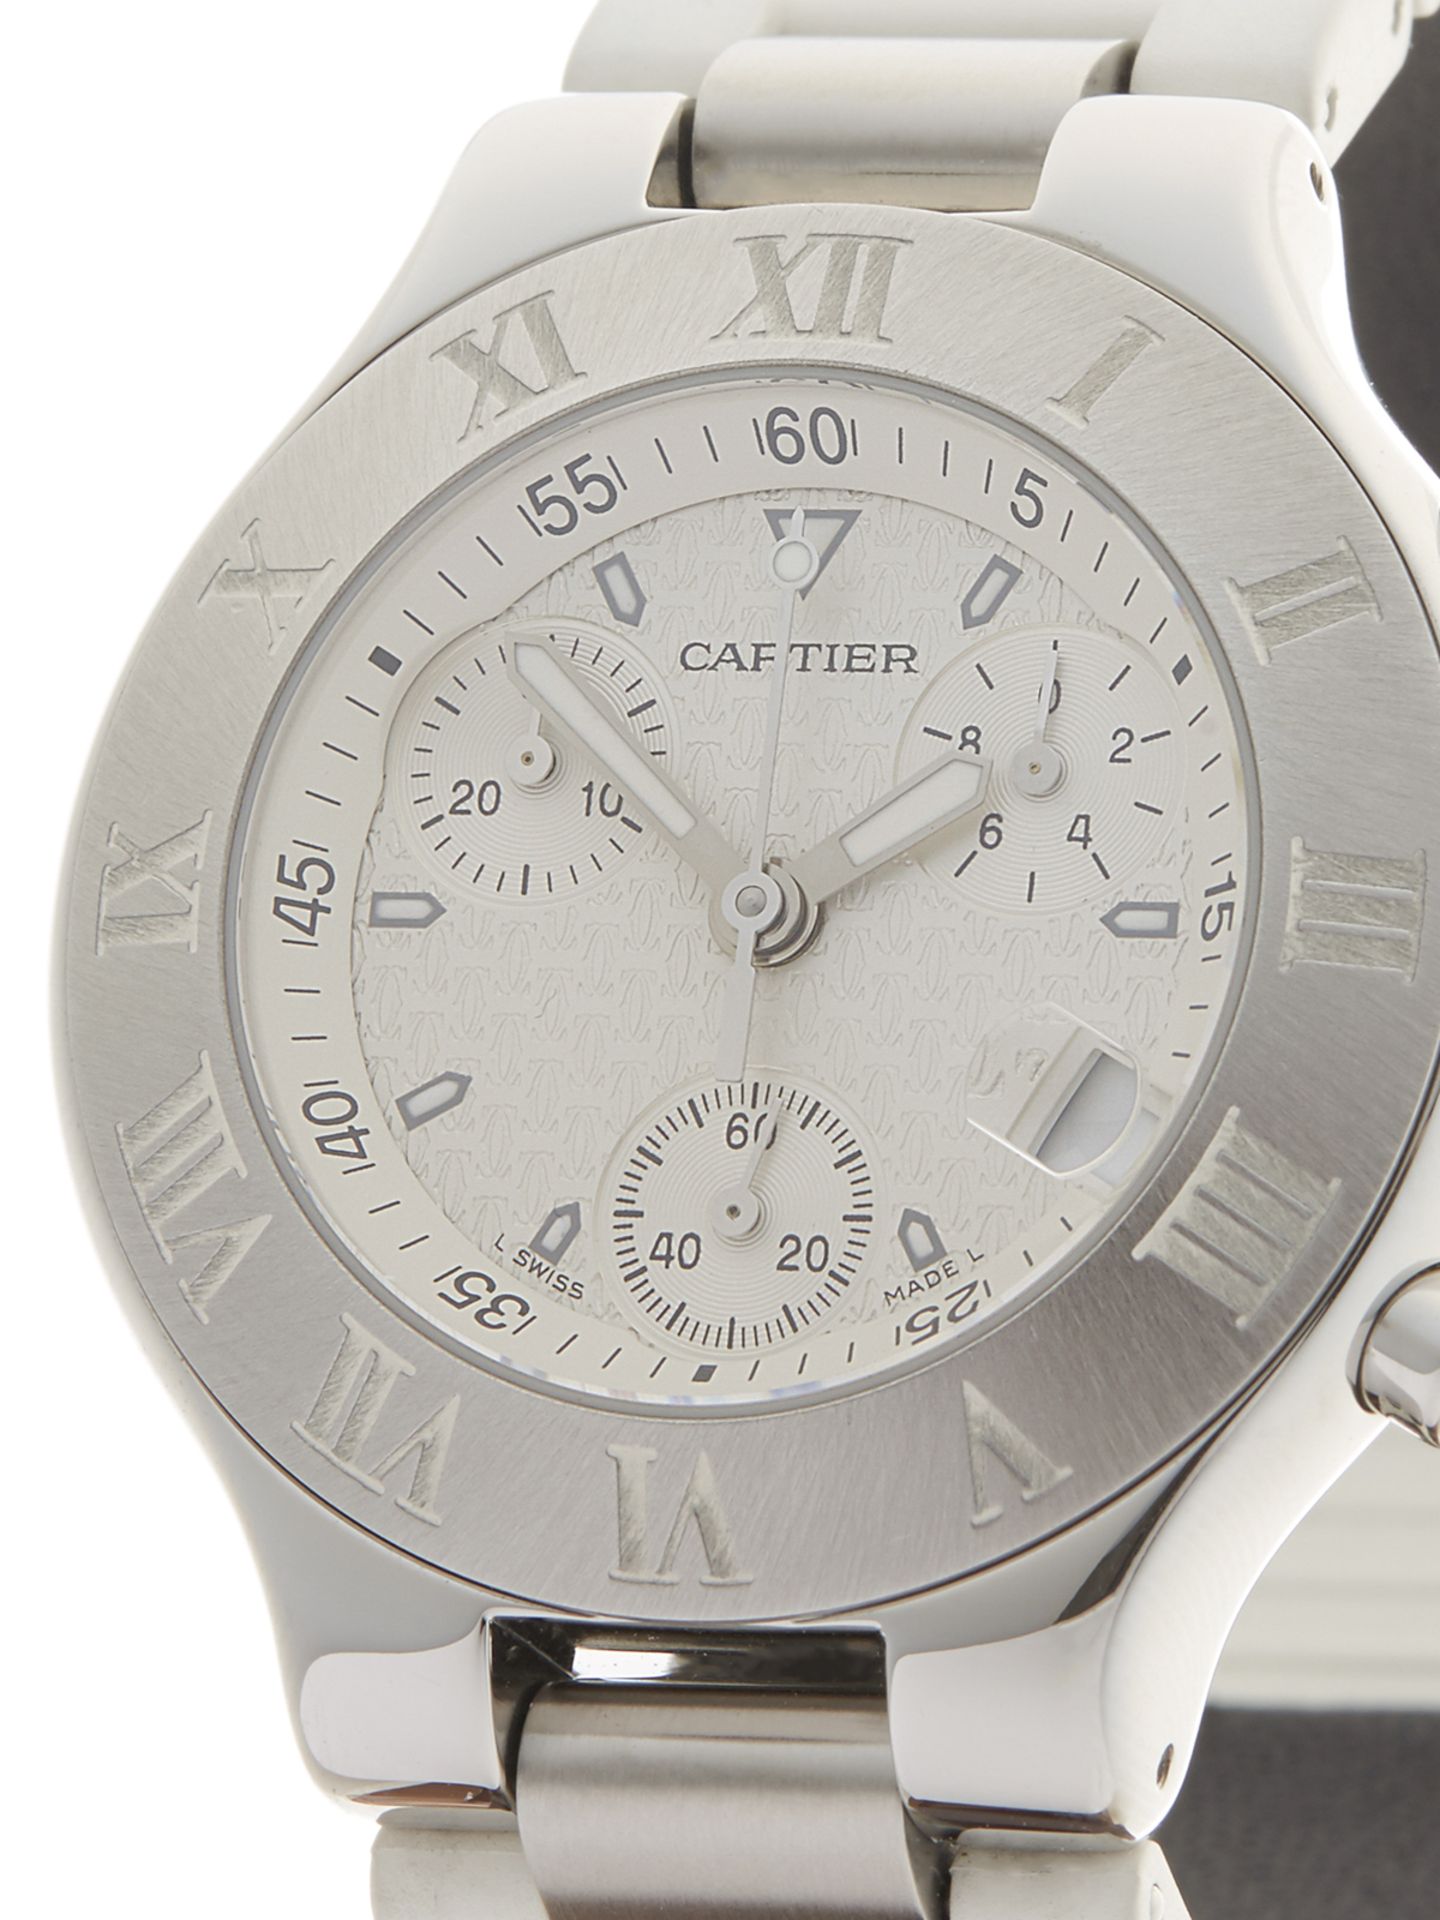 Cartier Must de 21 Chronoscaph 38mm Stainless Steel 2424 - Image 3 of 16